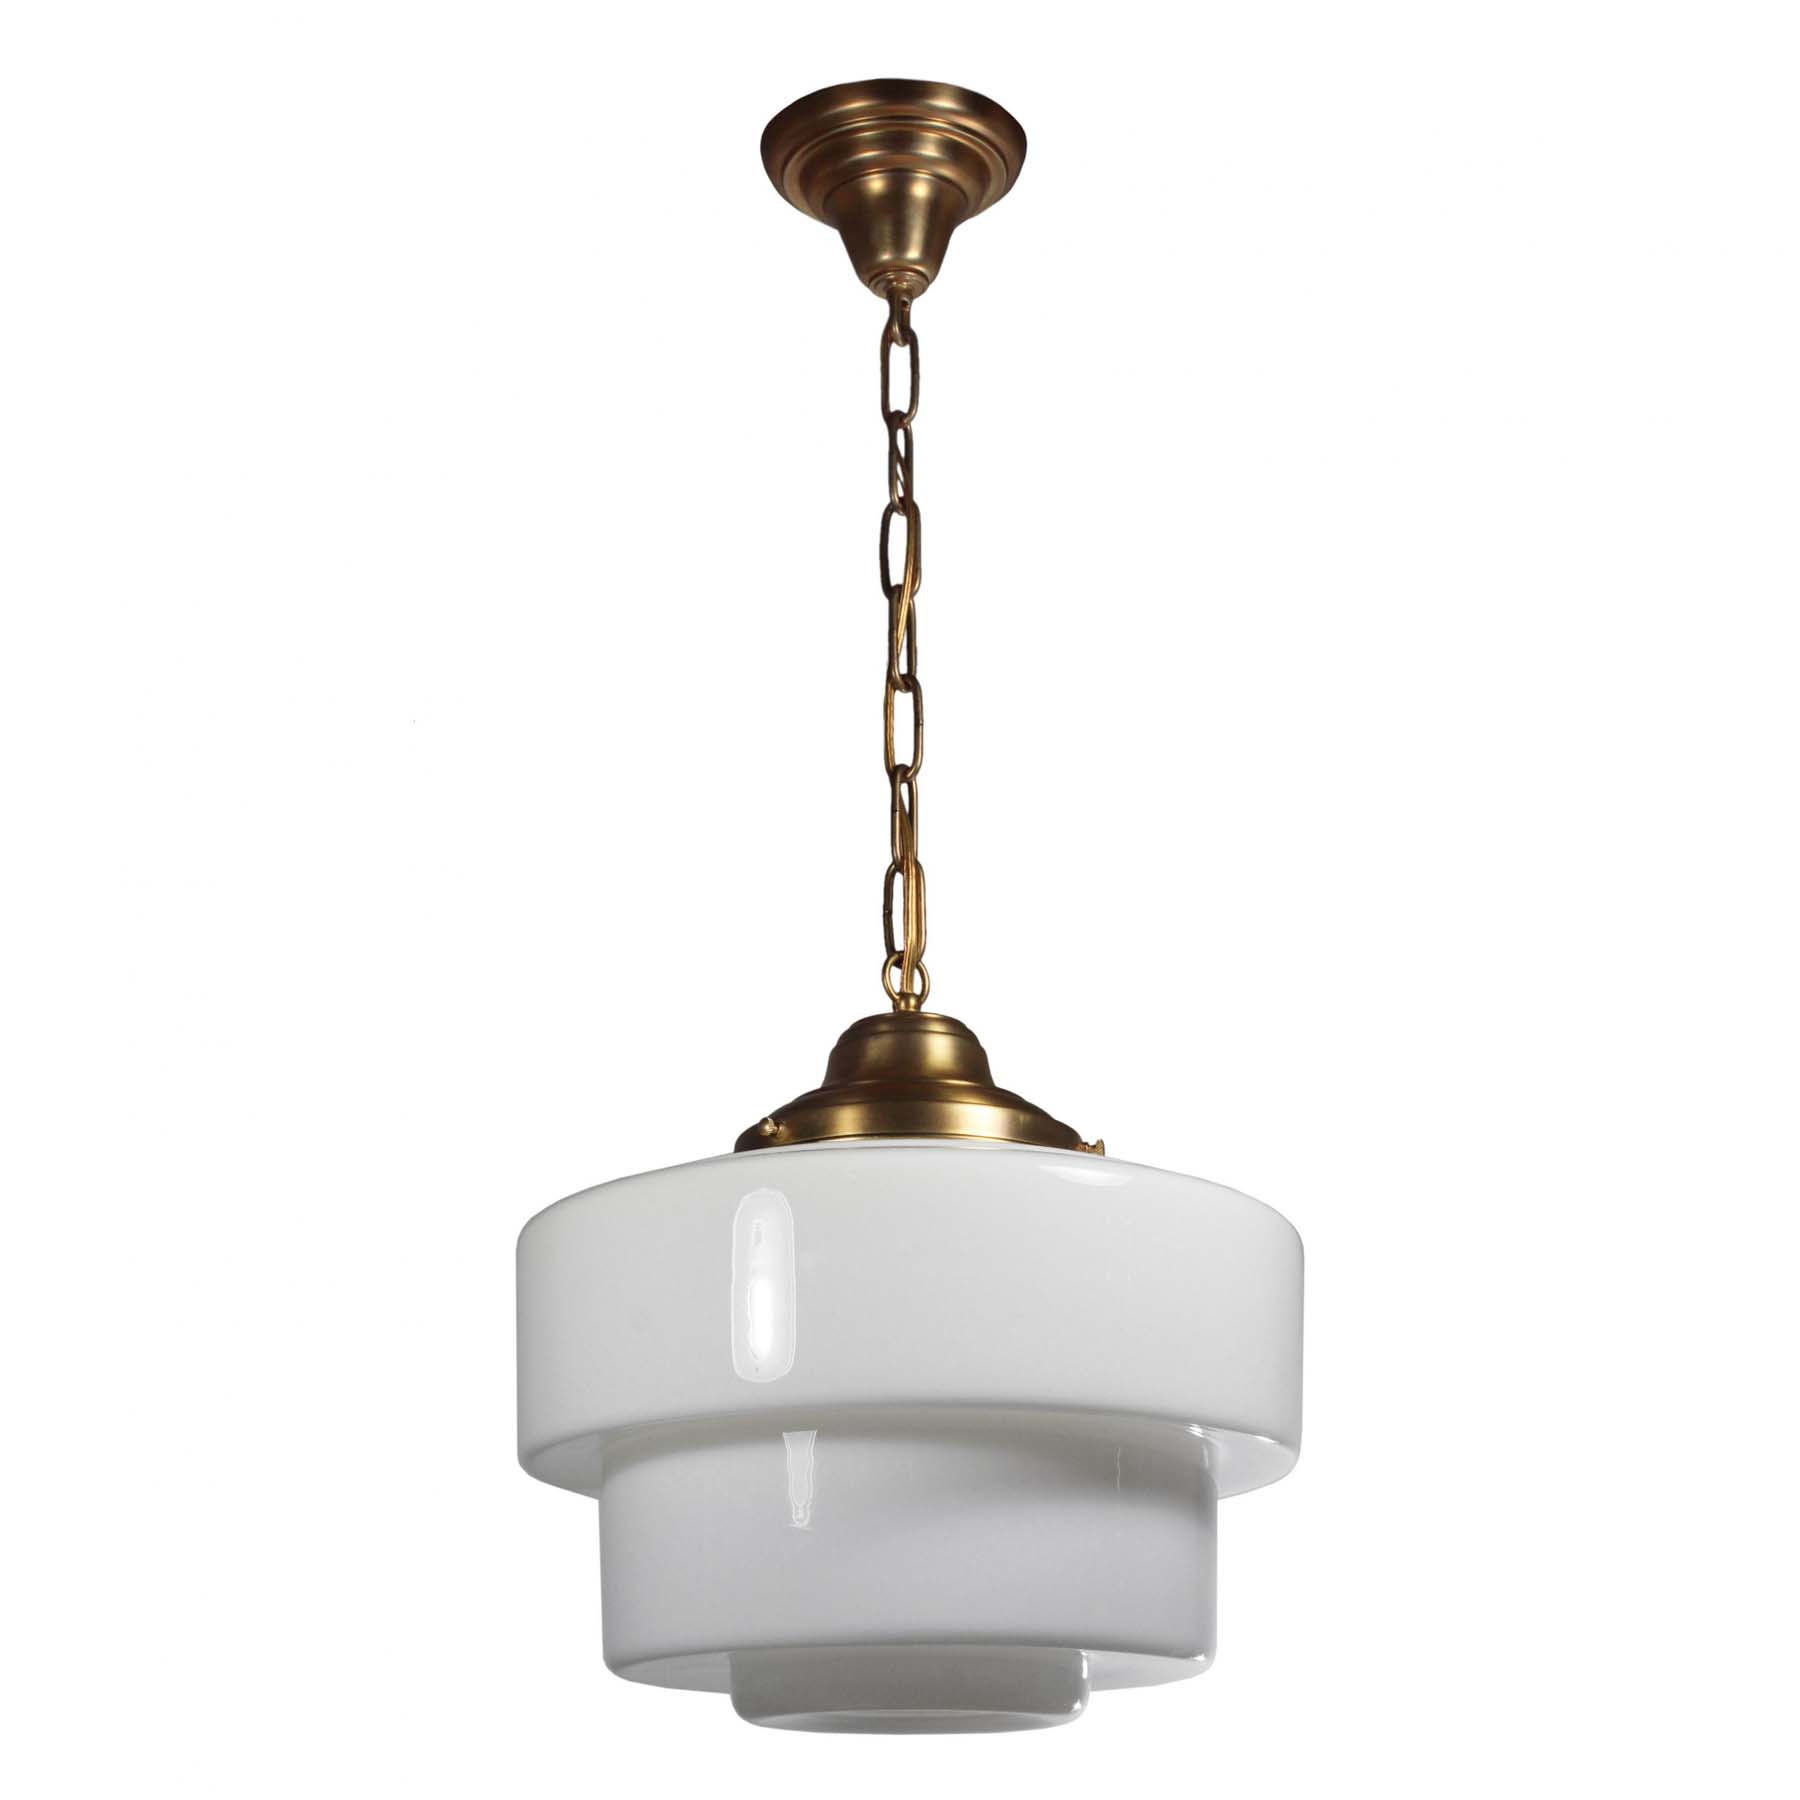 SOLD Antique Schoolhouse Pendant Light with Unusual Shade-67682